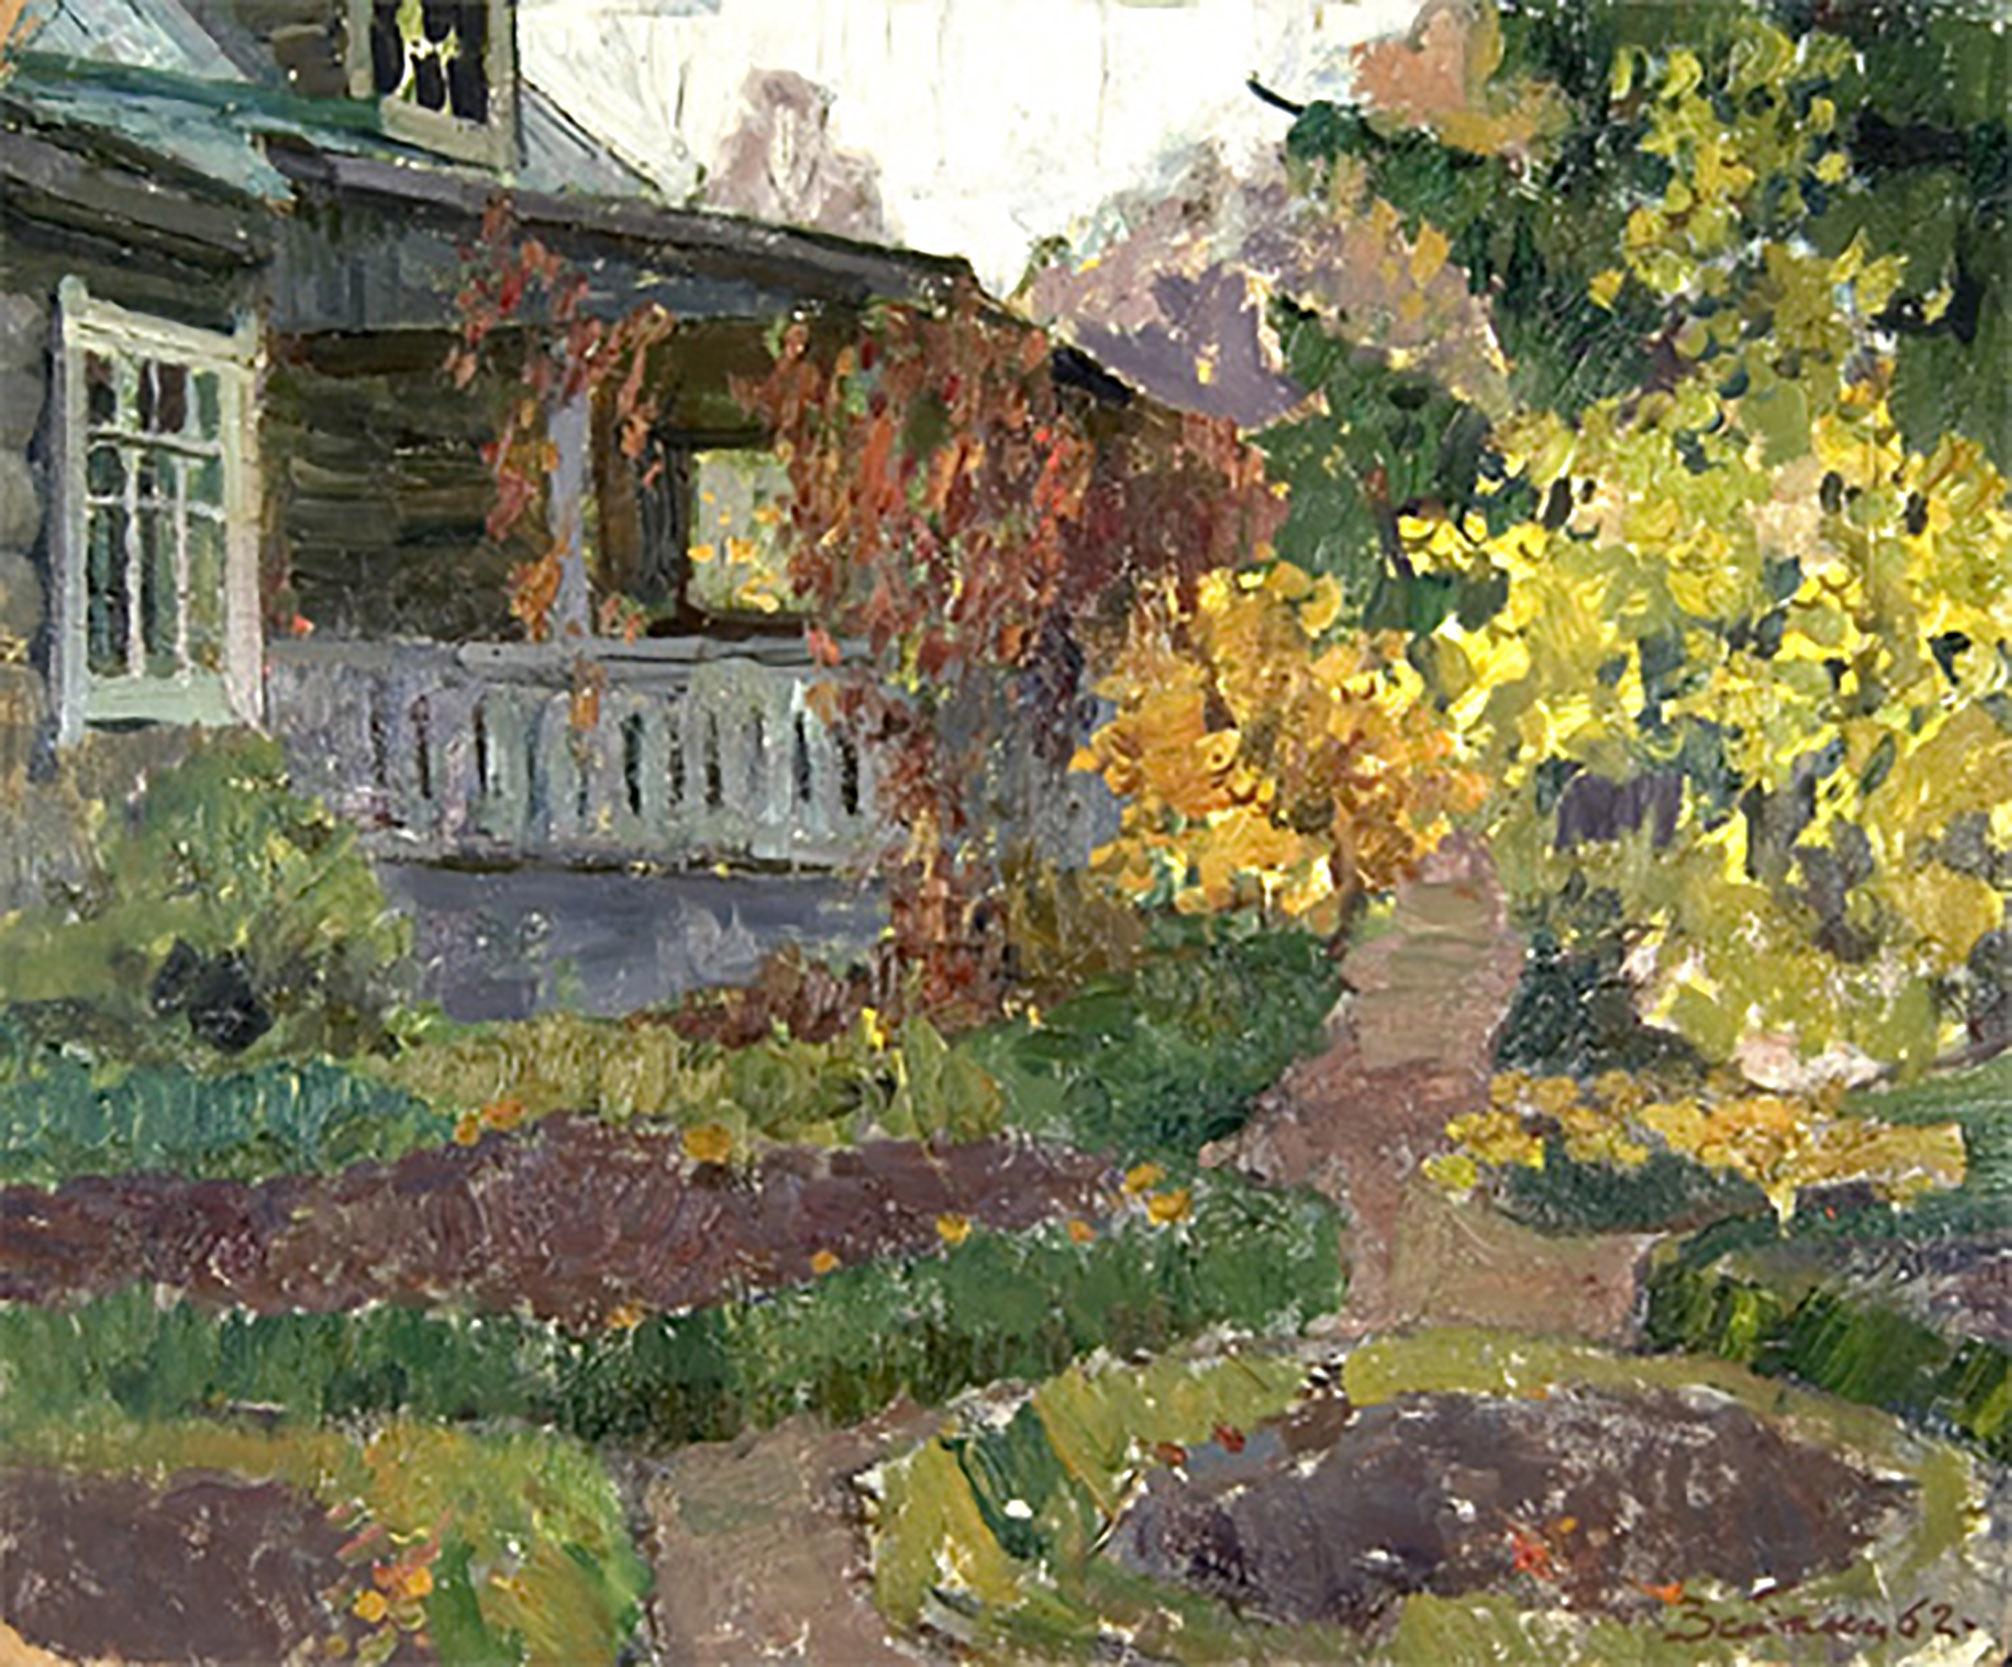 Vyacheslav Zabelin (1935- 2001) Considered a living master during his lifetime in Moscow, painted Garden in Fall in 1962. Zabelin had already 300 paintings in museum collections throughout the world at the time of his death. A Surikov professor and